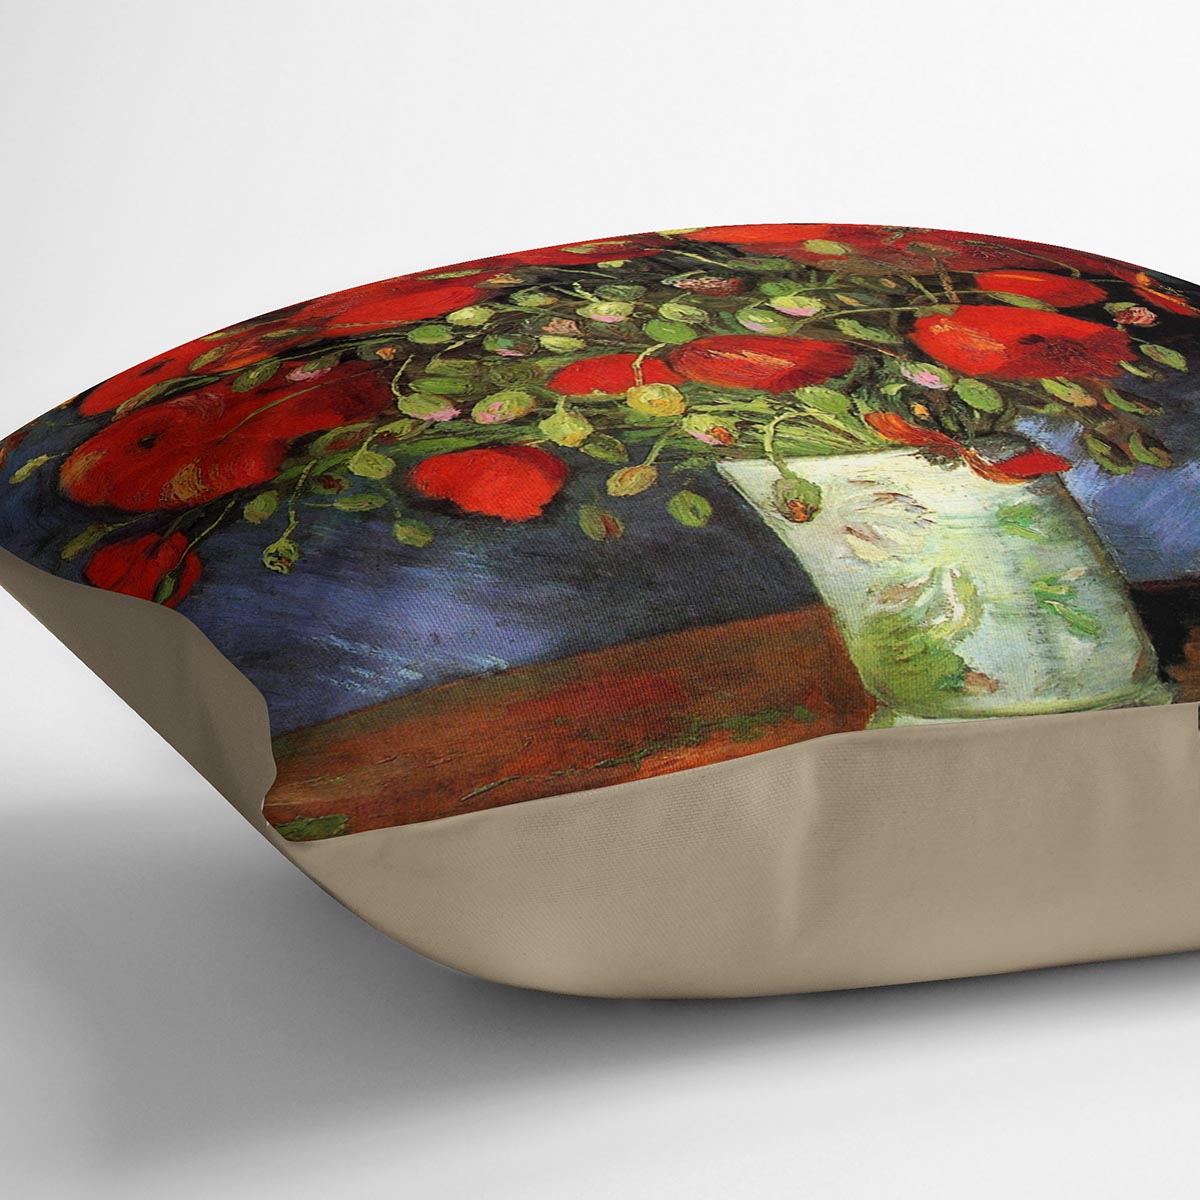 Vase with Red Poppies by Van Gogh Cushion